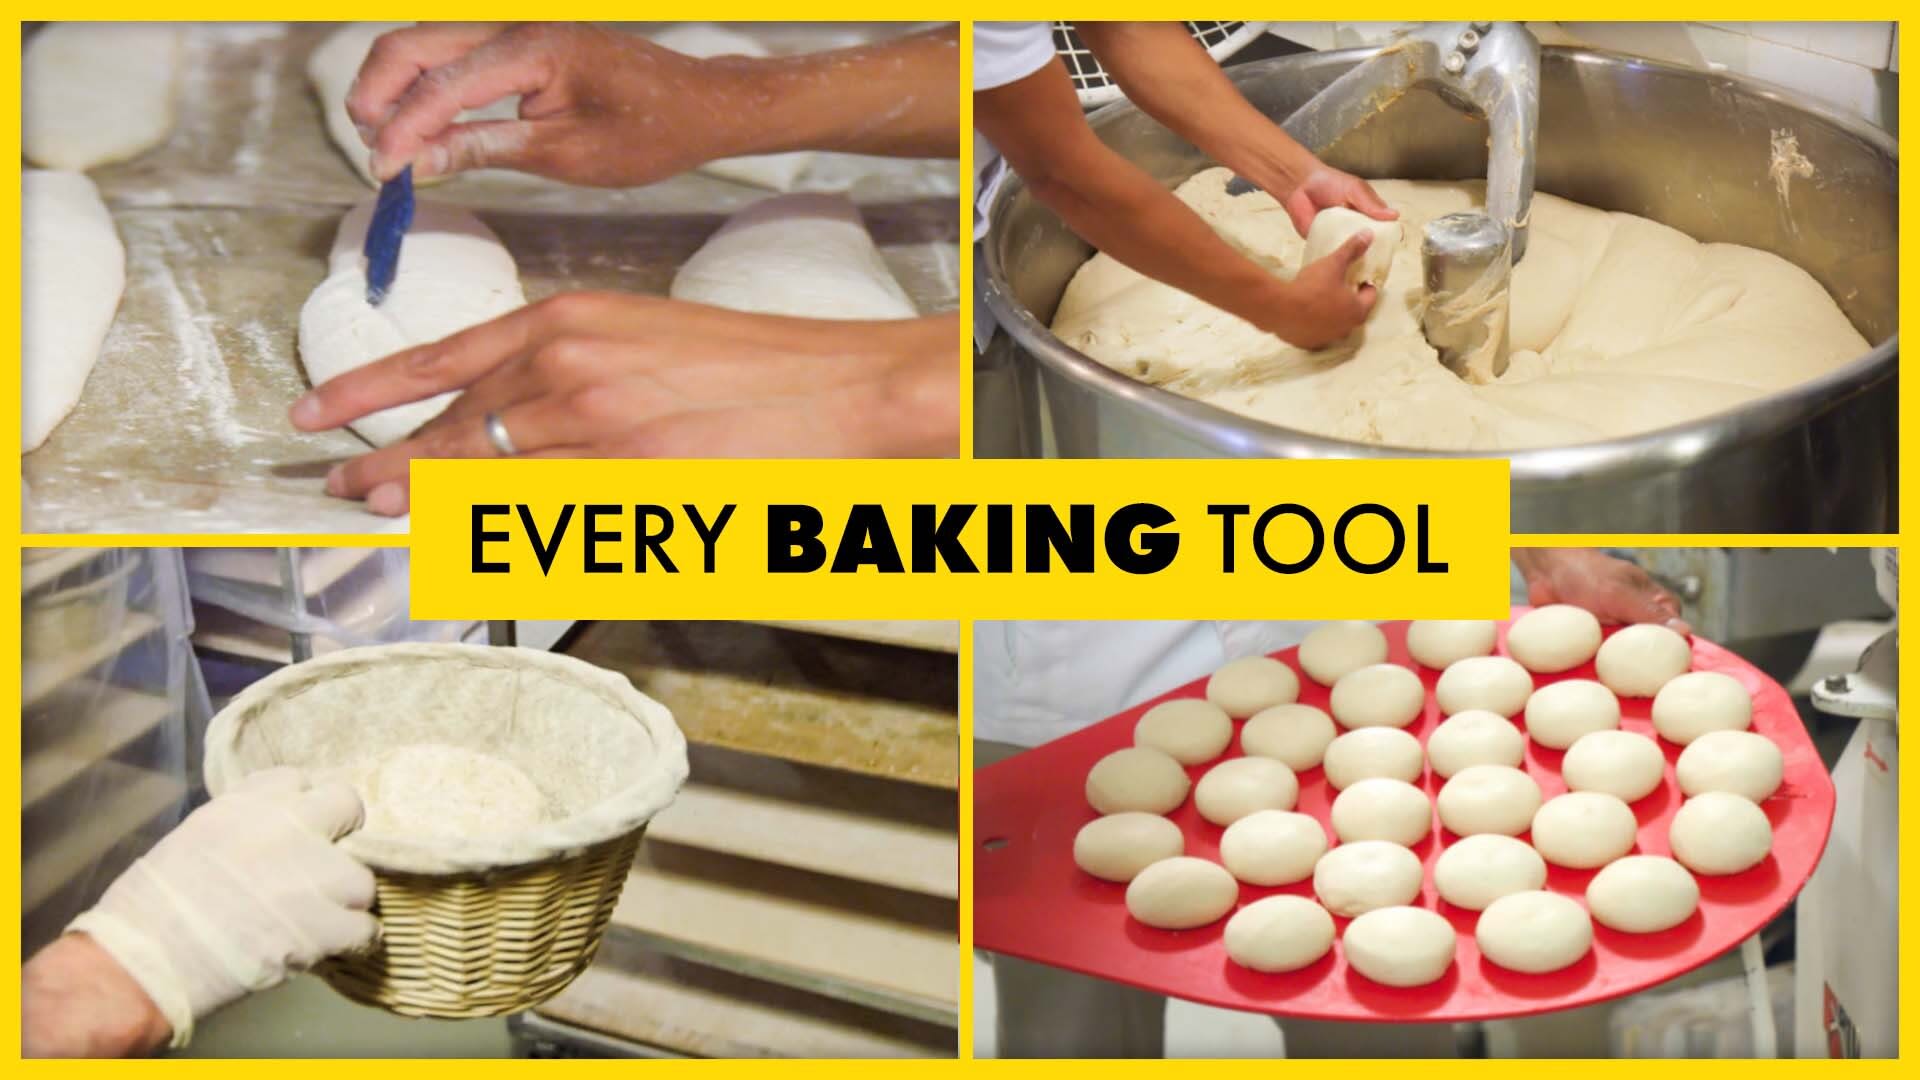 Watch Every Tool An Iconic NYC Bakery Uses To Make Bread & Pastry